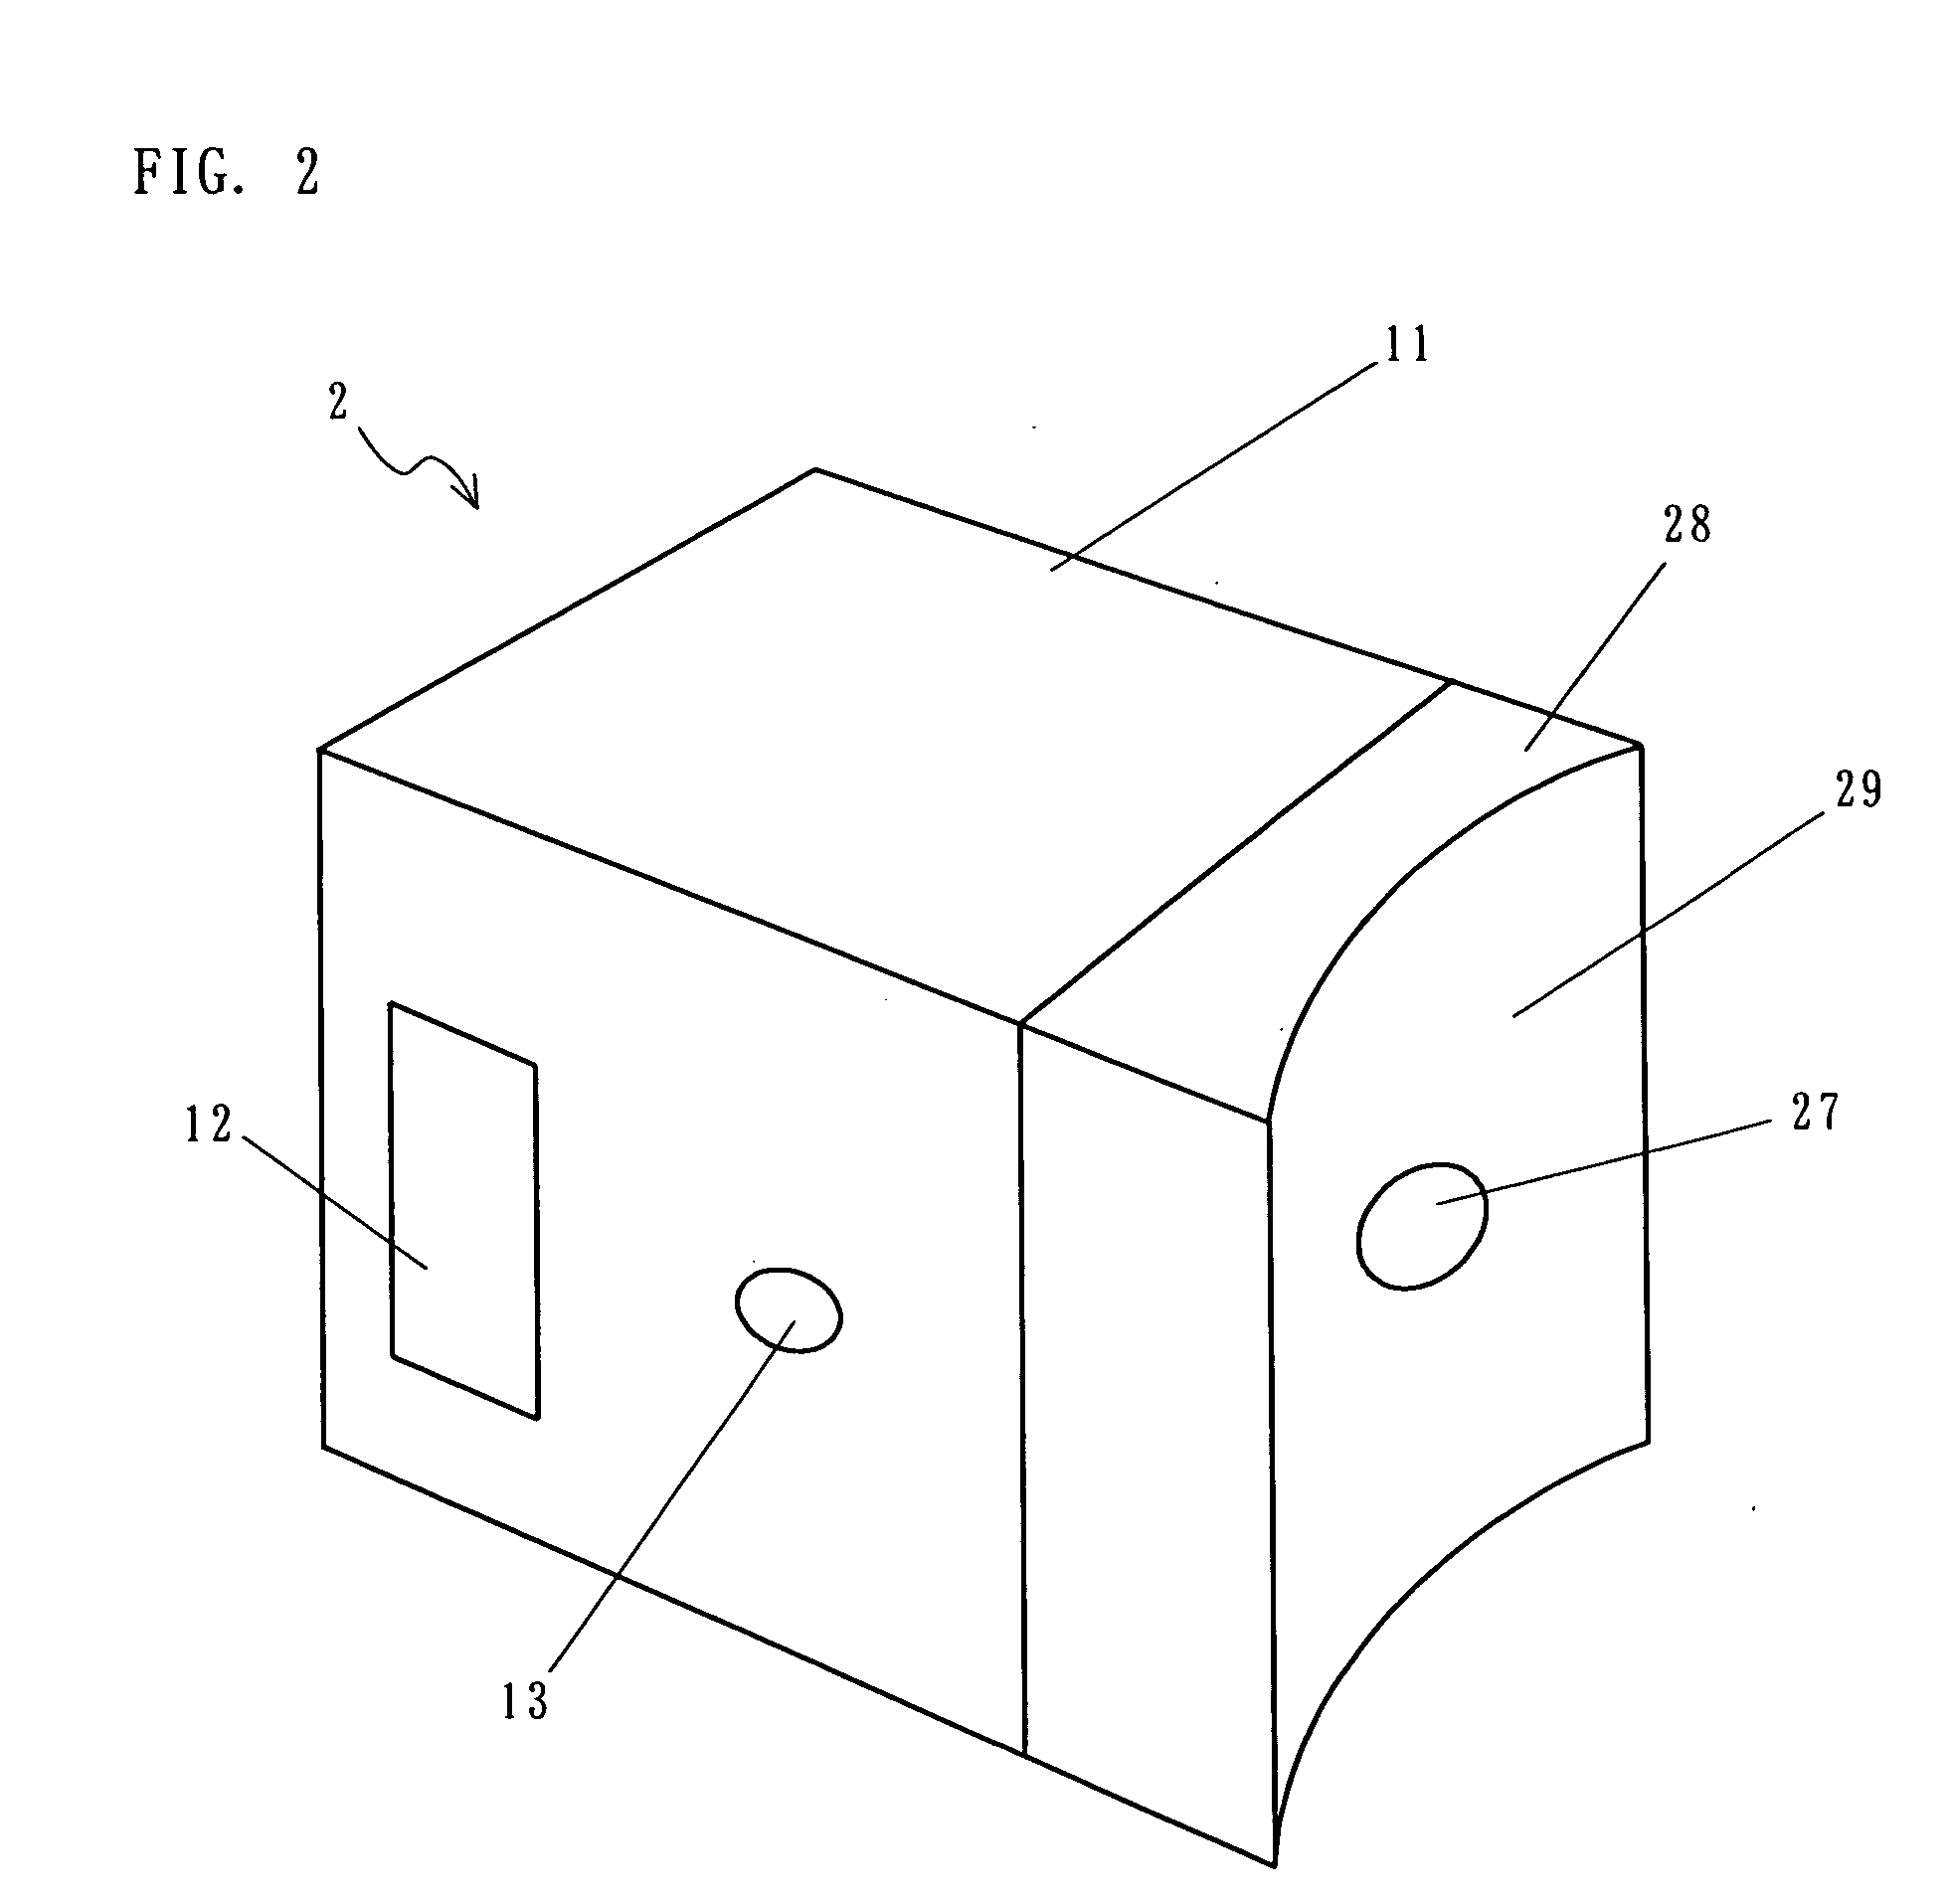 Apparatus for measuring biological component